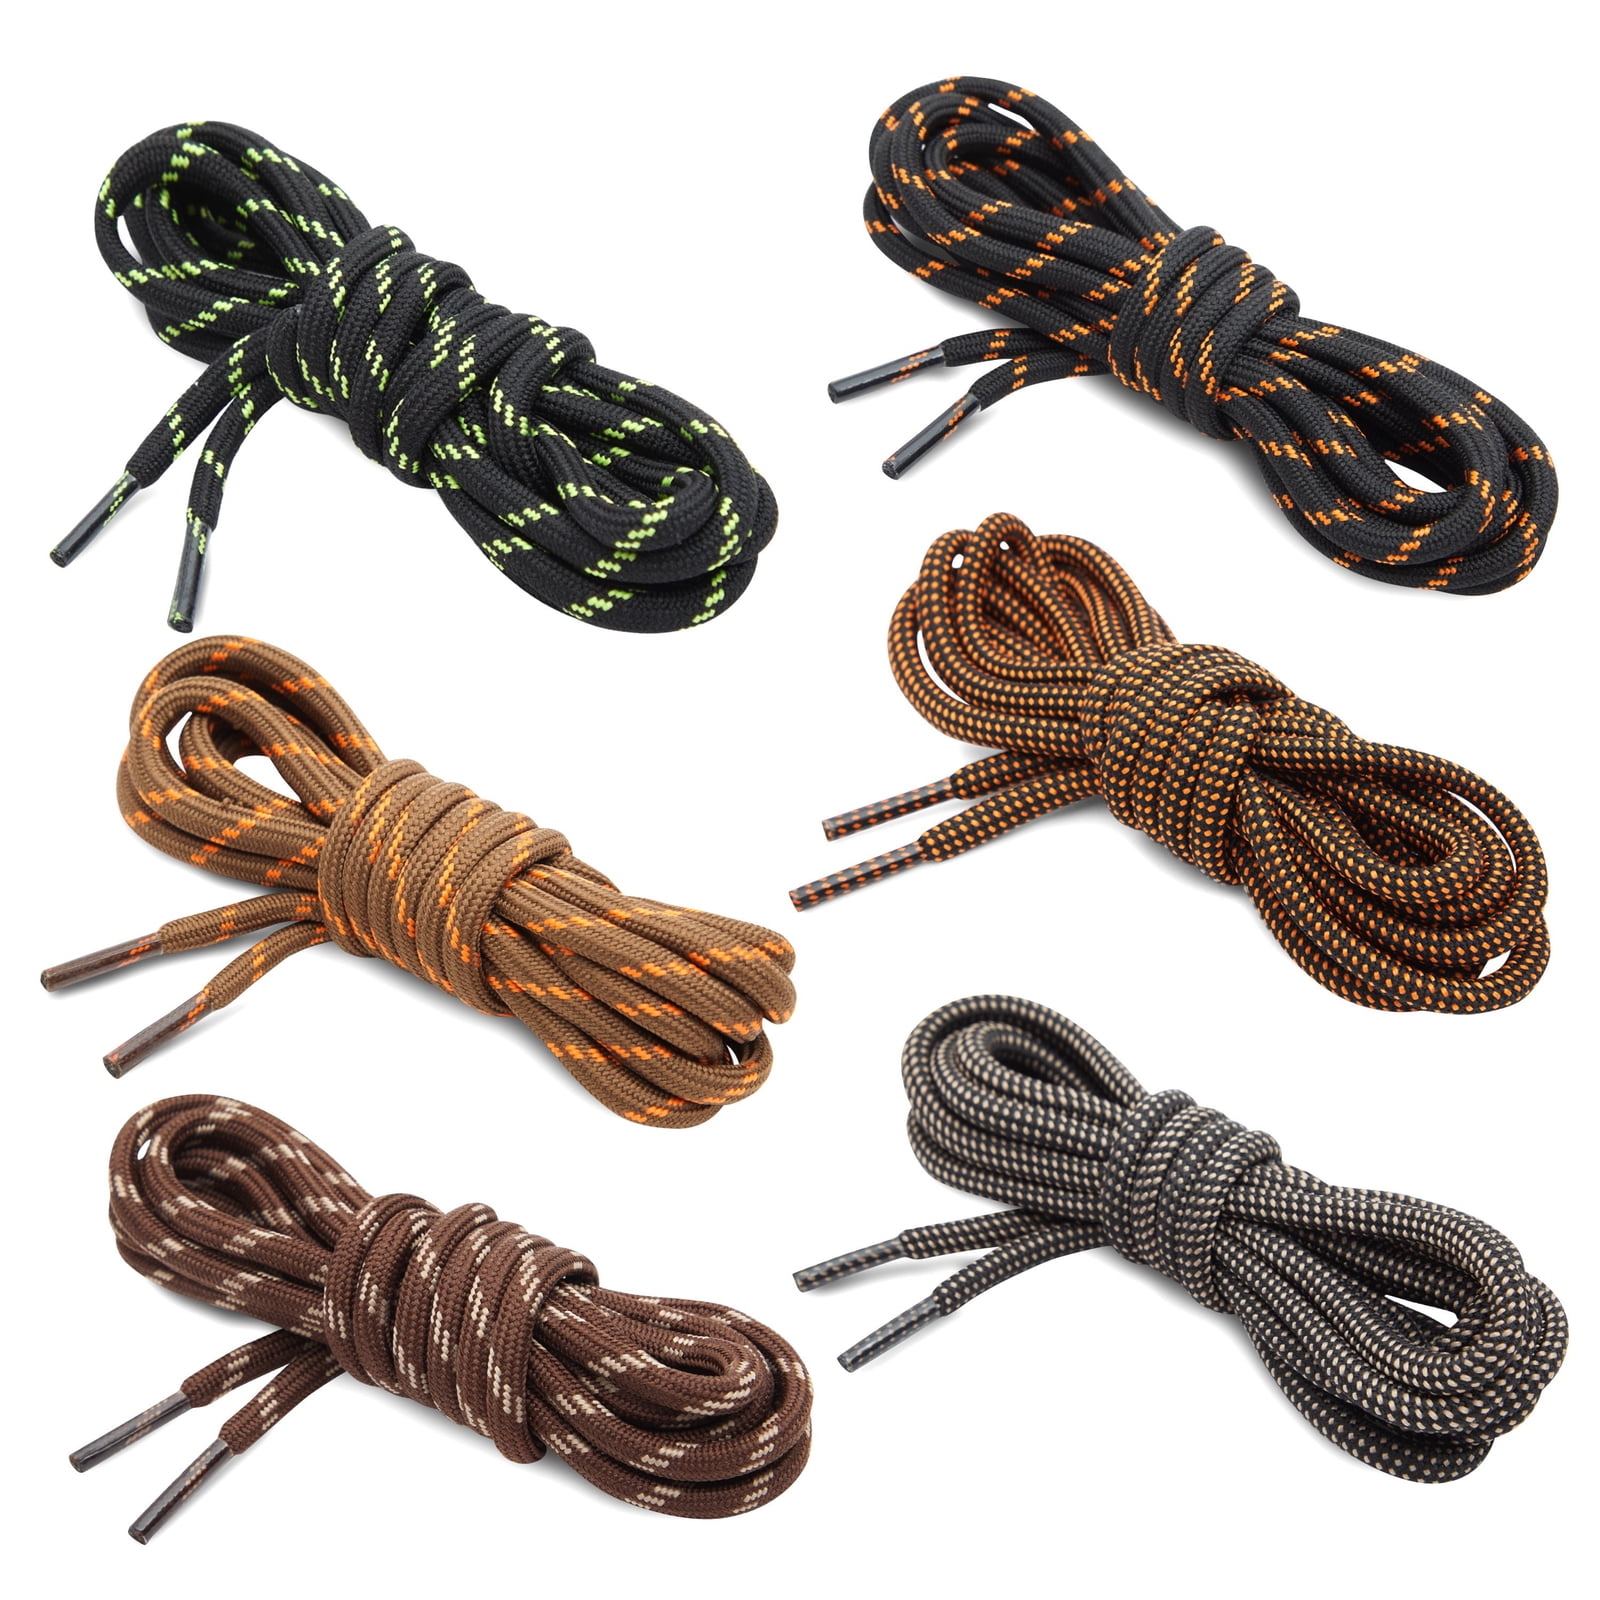 1 pair heavy duty outdoor hiking round work boot shoe laces strings replacement 